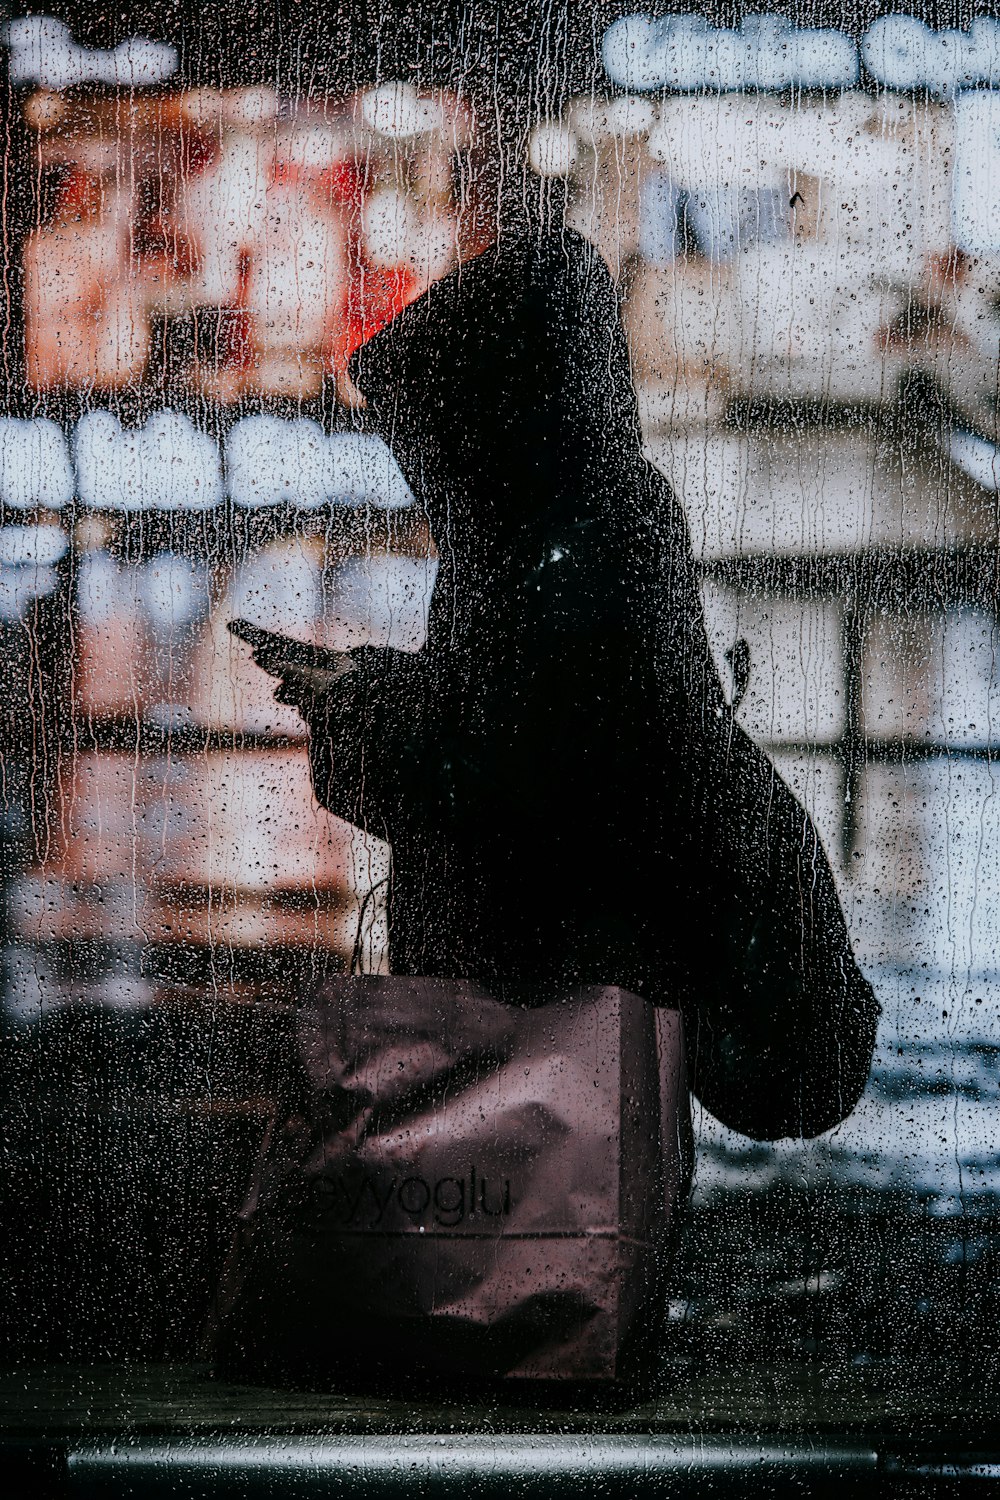 silhouette of person in front of glass window